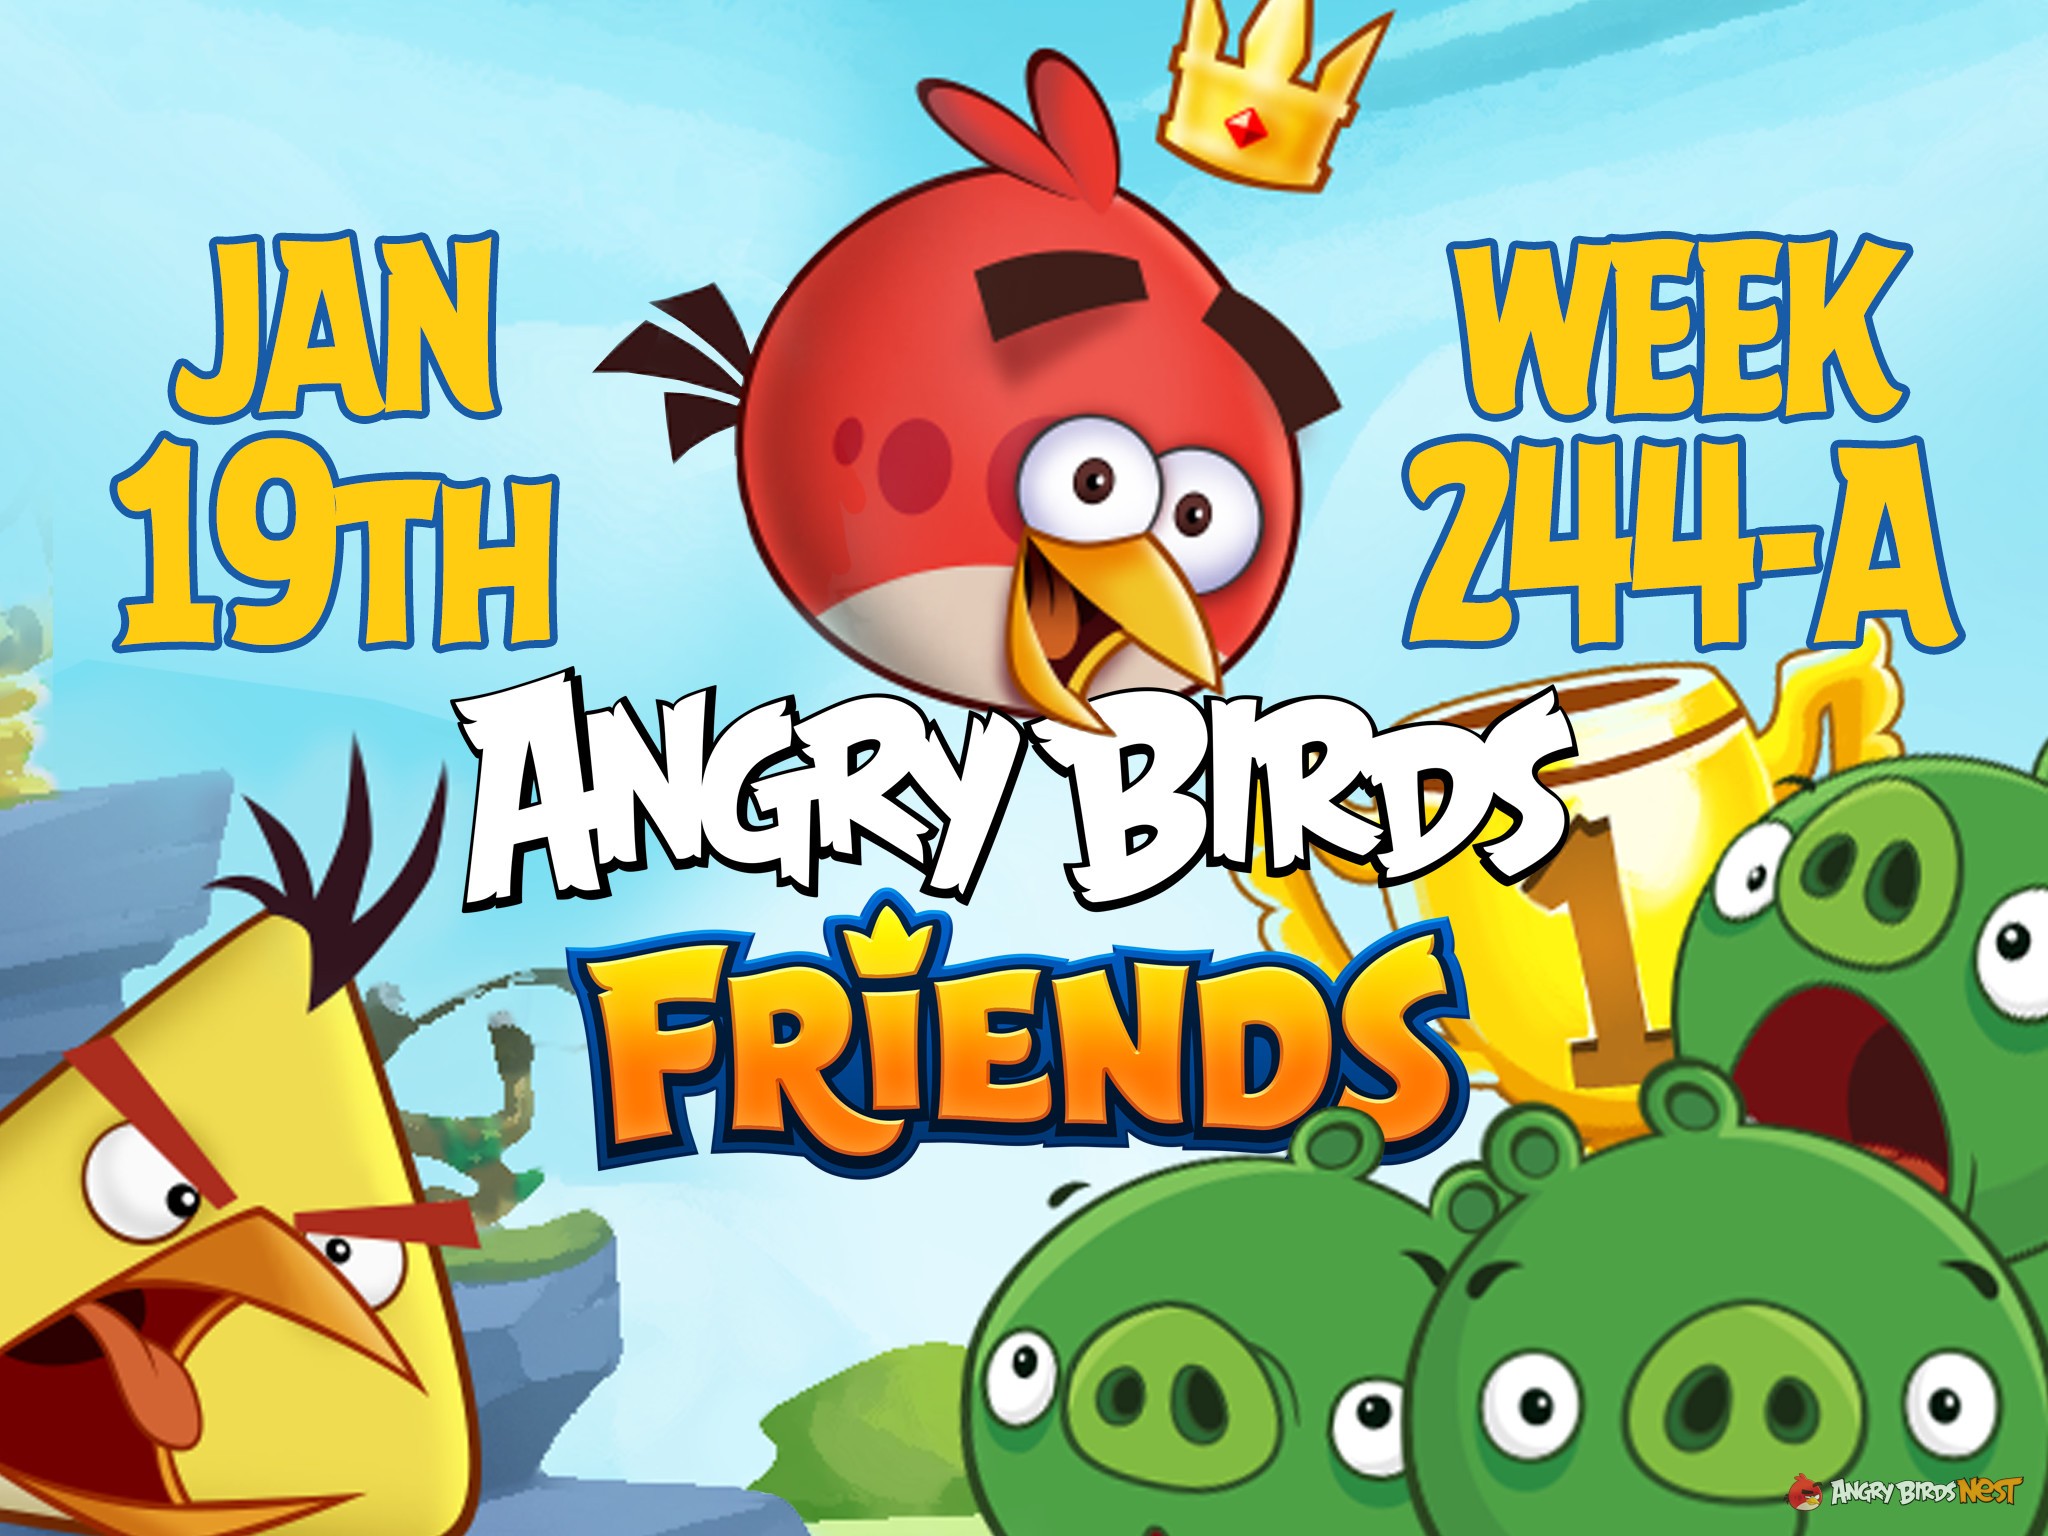 Angry Birds Friends Tournament Week 244-A Feature Image